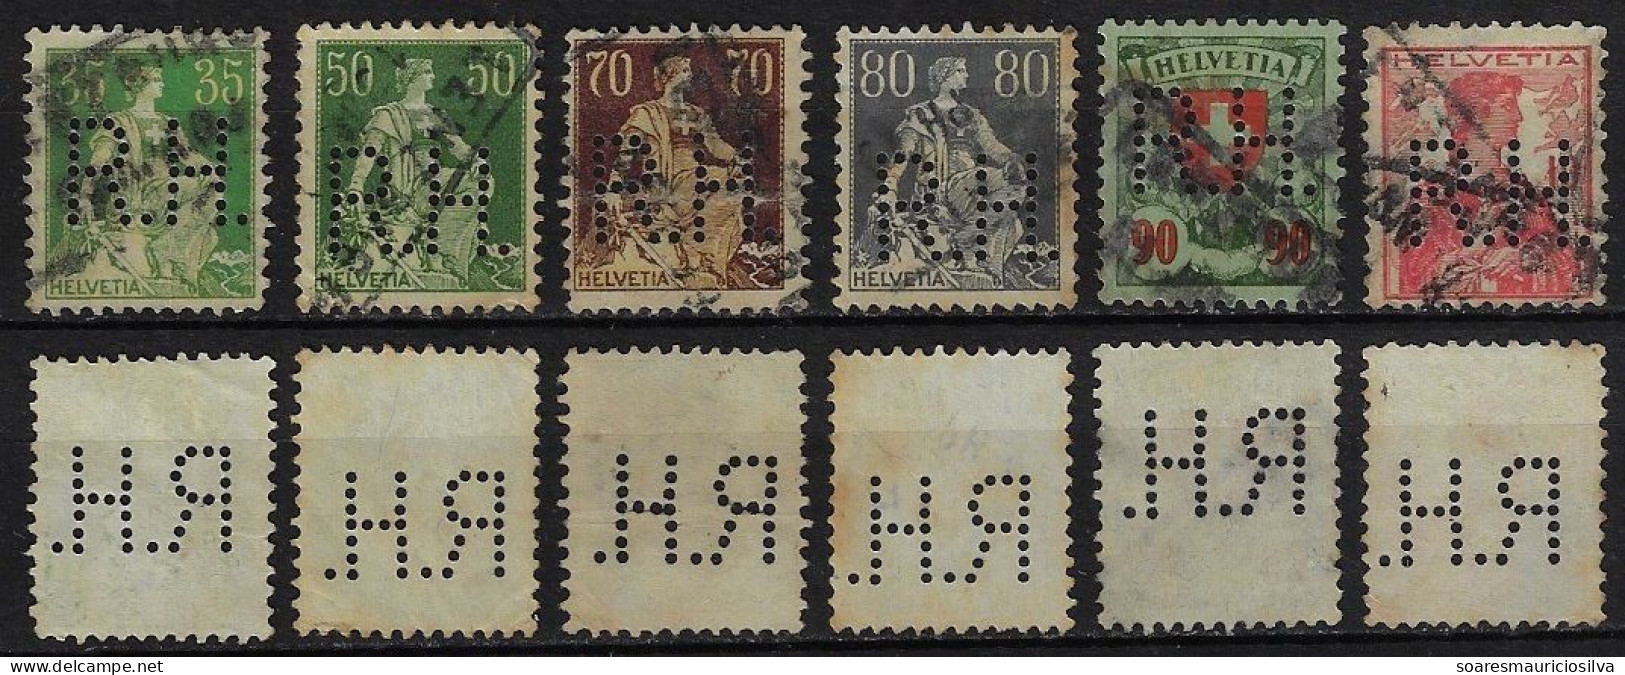 Switzerland 1908/1925 6 Stamp Perfin R.H. By Roth & Henkel (Hero AG) + Rud. Hirt & Sohne From Lenzburg Lochung Perfore - Perforés